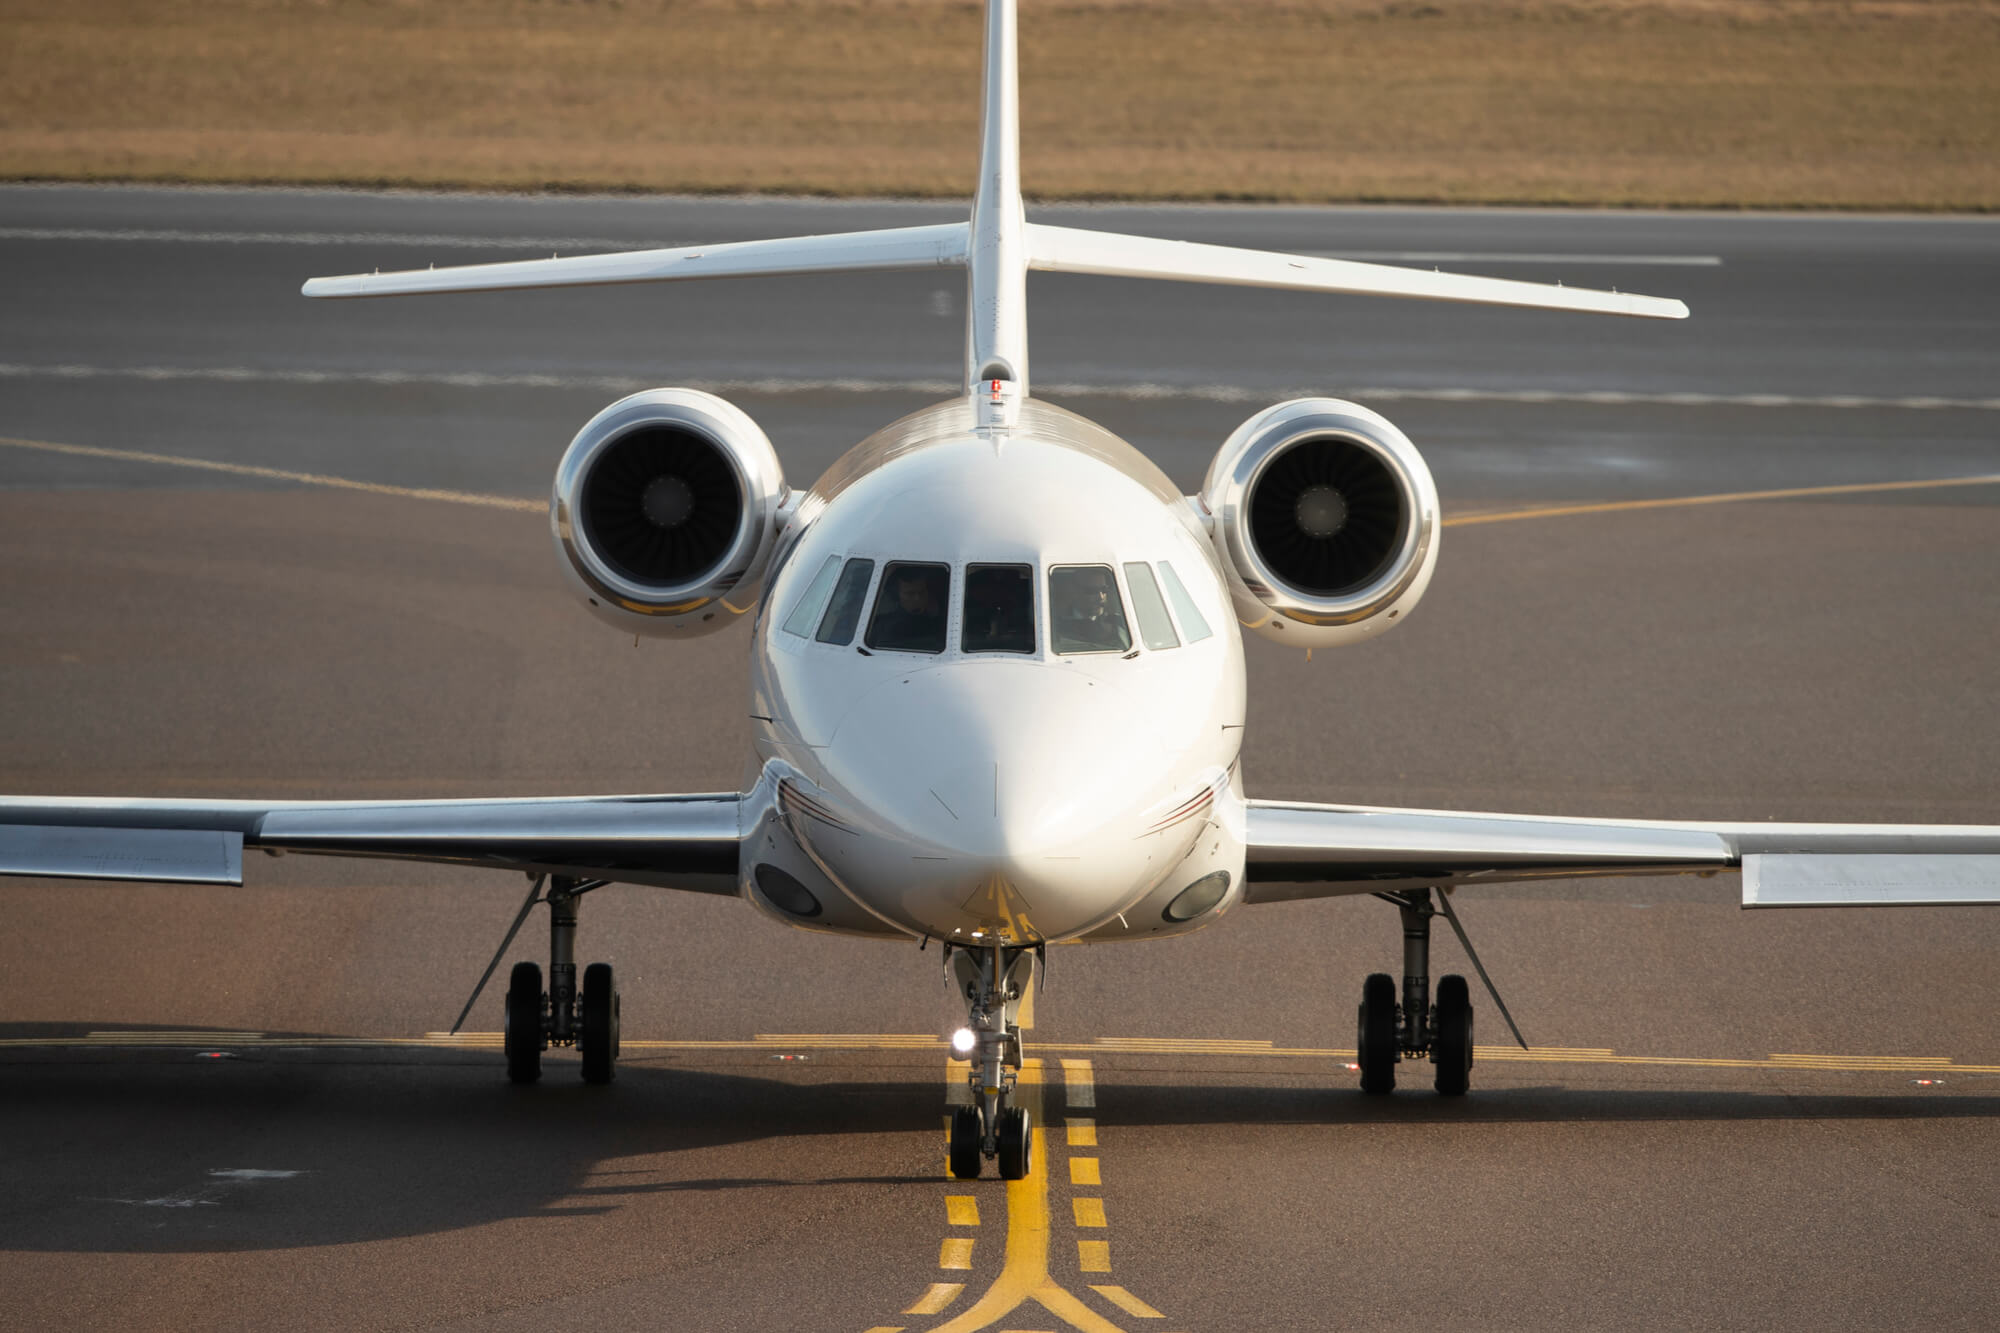 Will France ban private jet flying? - AeroTime